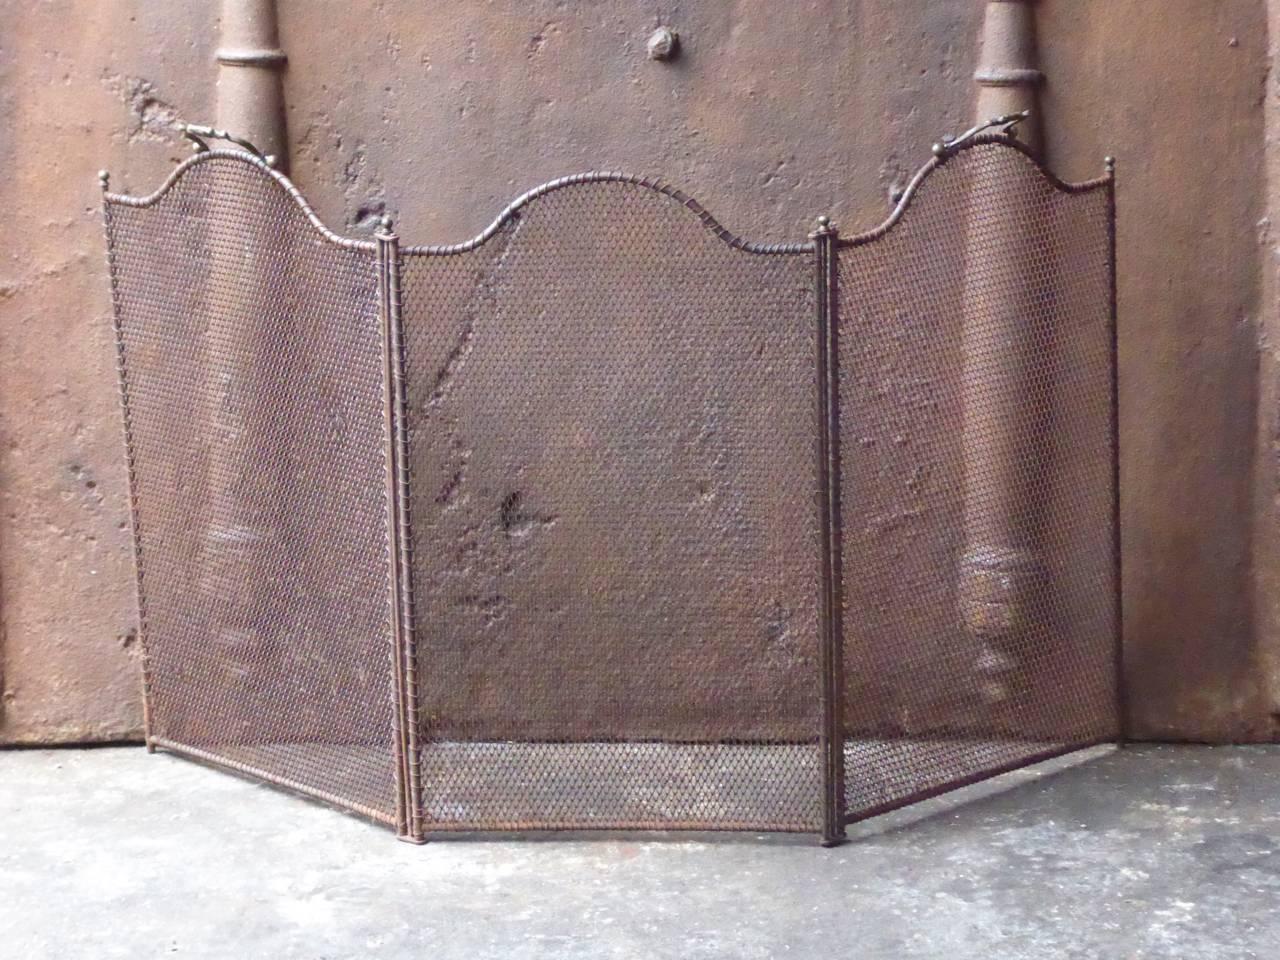 19th century French fireplace screen made of iron and iron mesh.